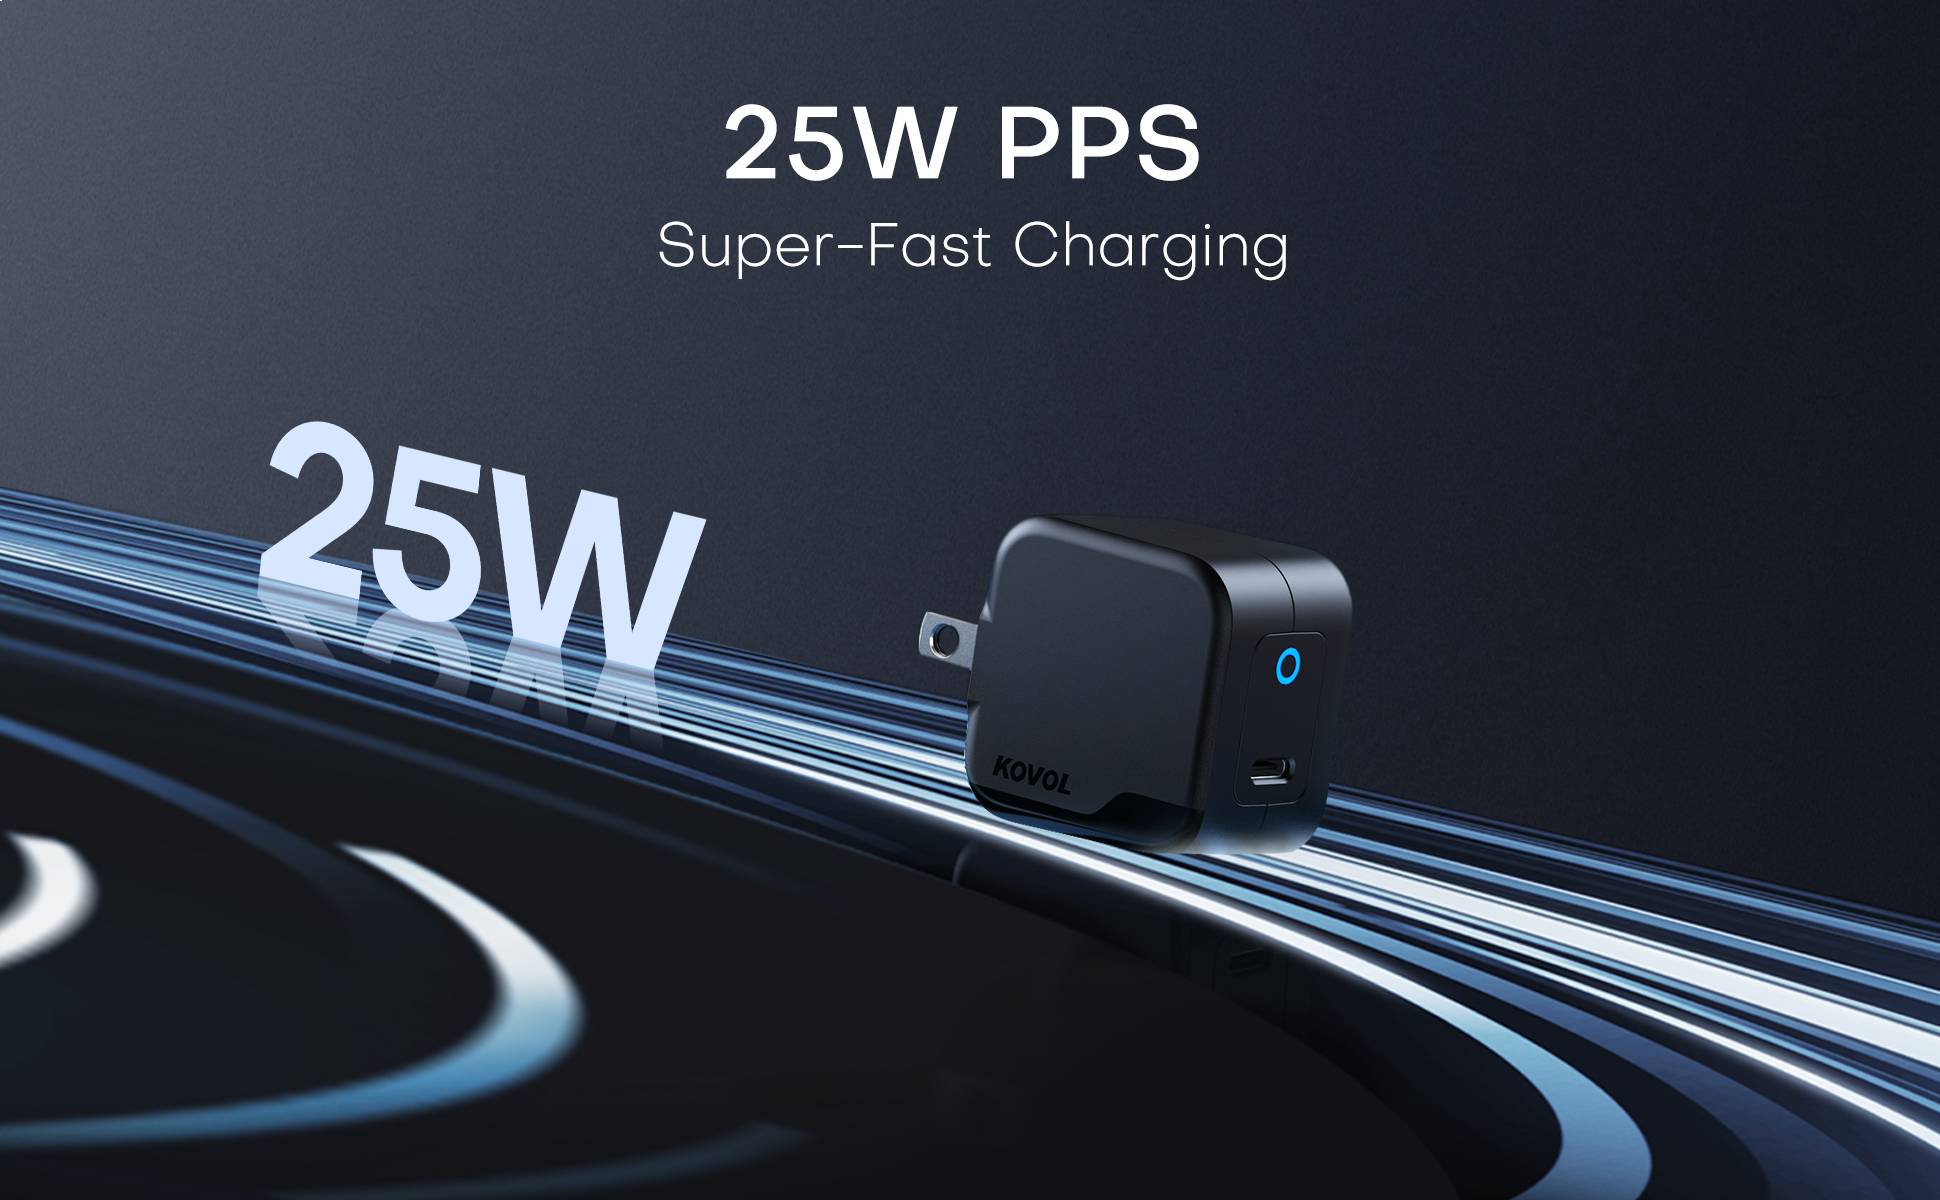 25w pps super-fast charging